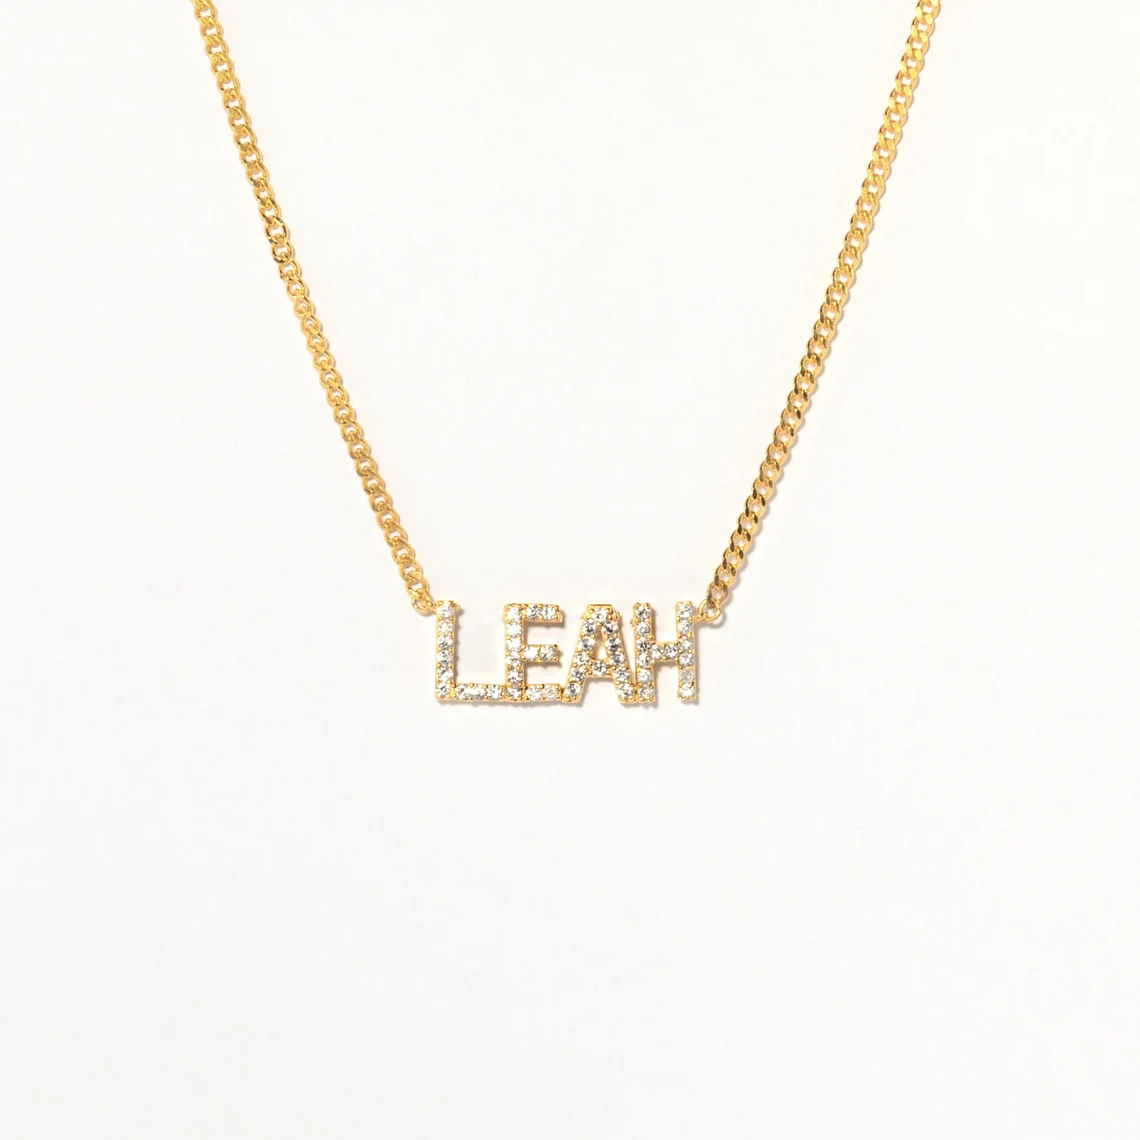 Custom Name Necklace With Cuban Chain